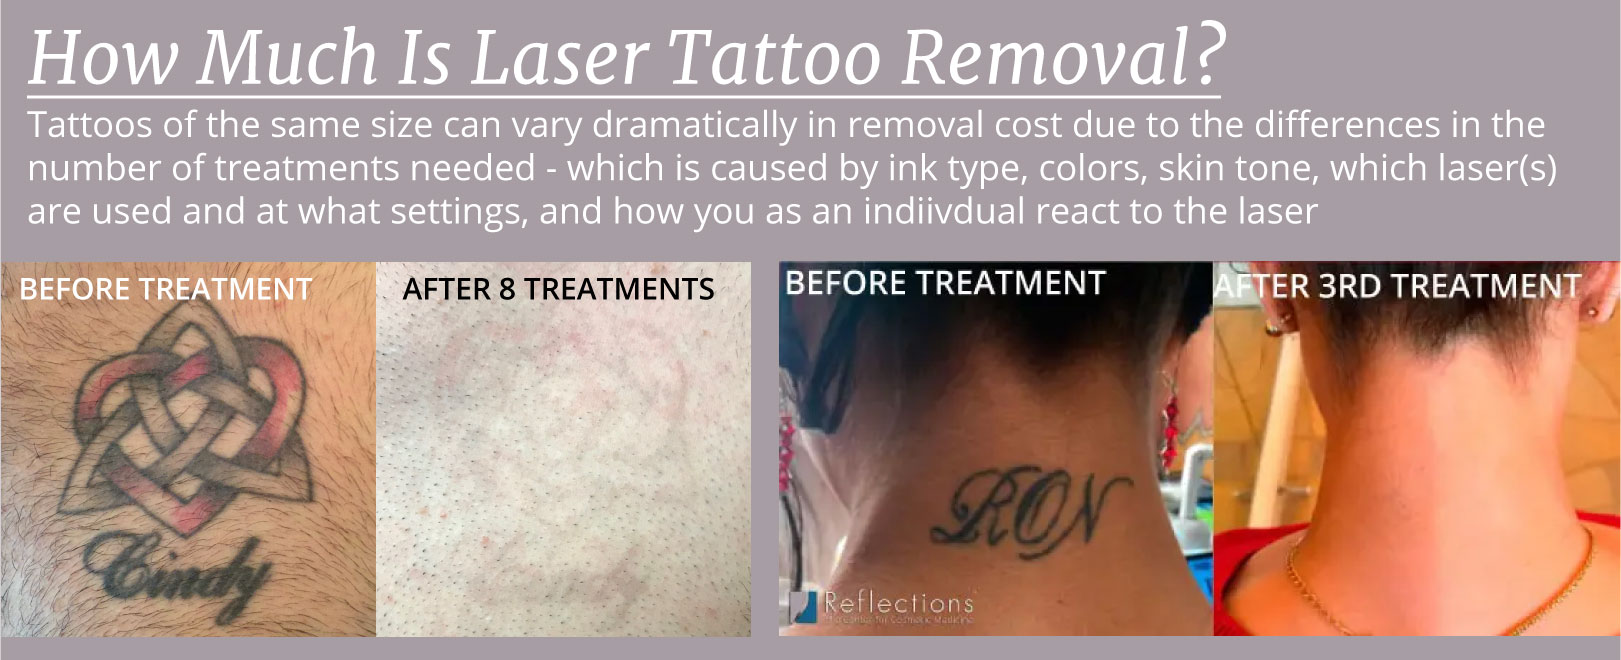 How Much is Laser Tattoo Removal in NJ?